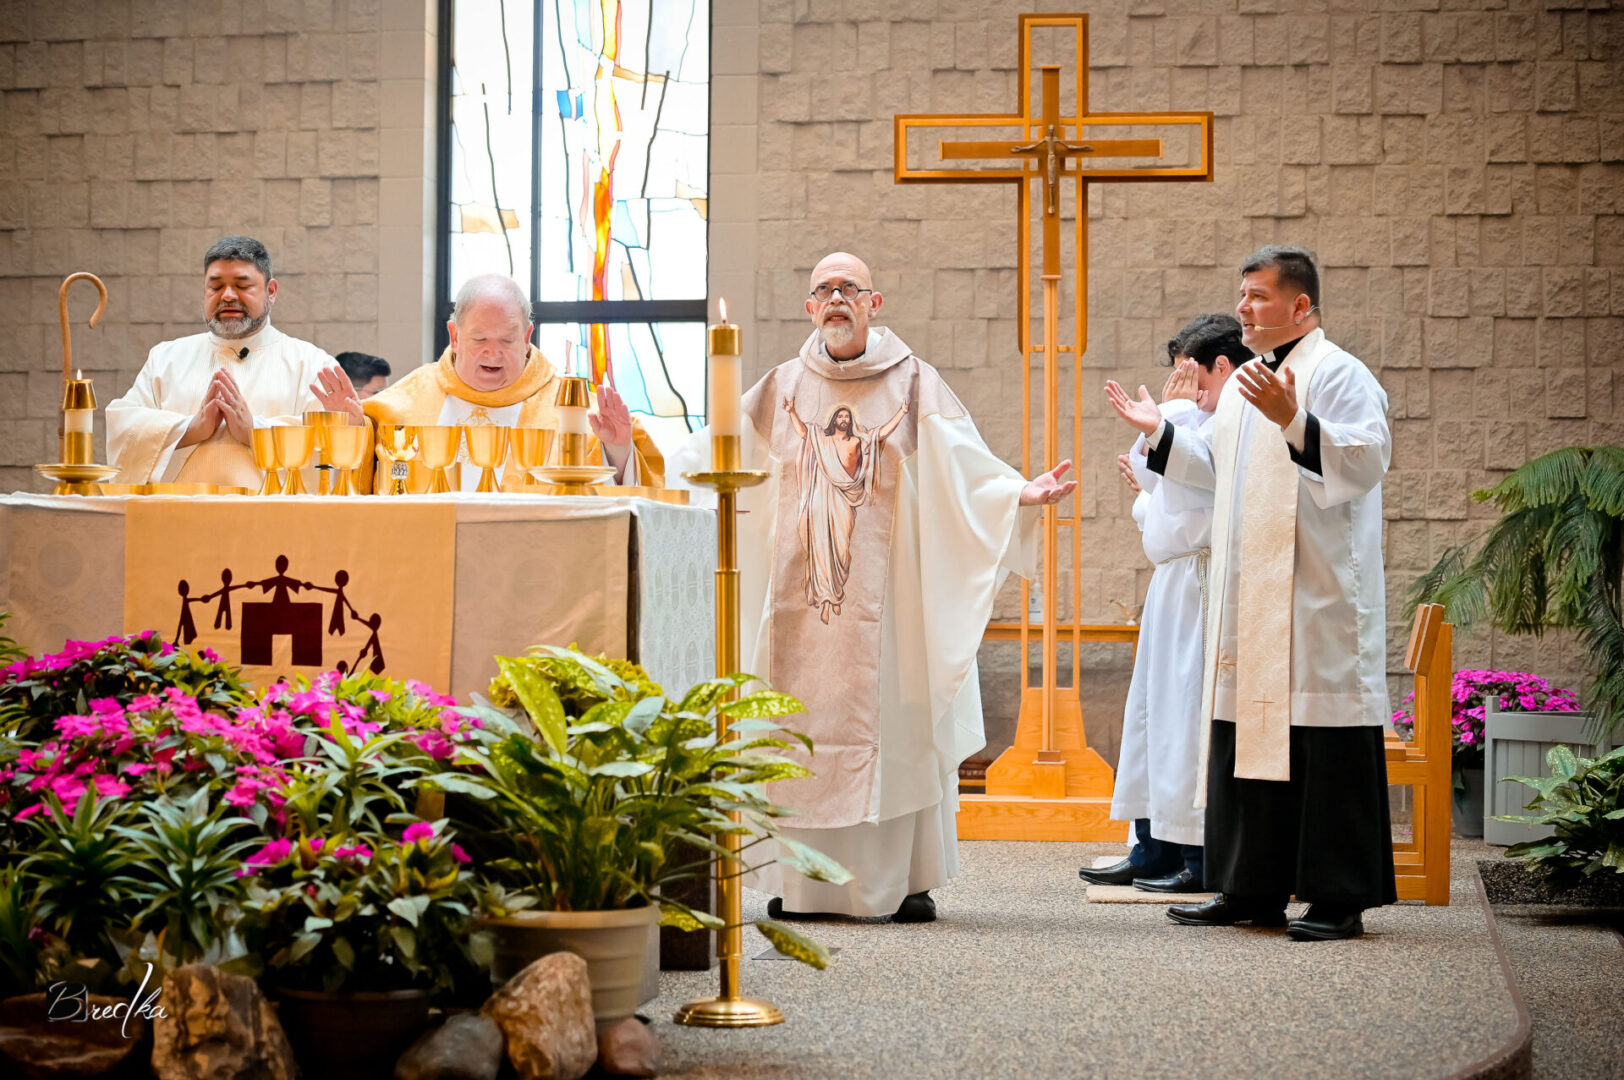 Four priests performing a church service.